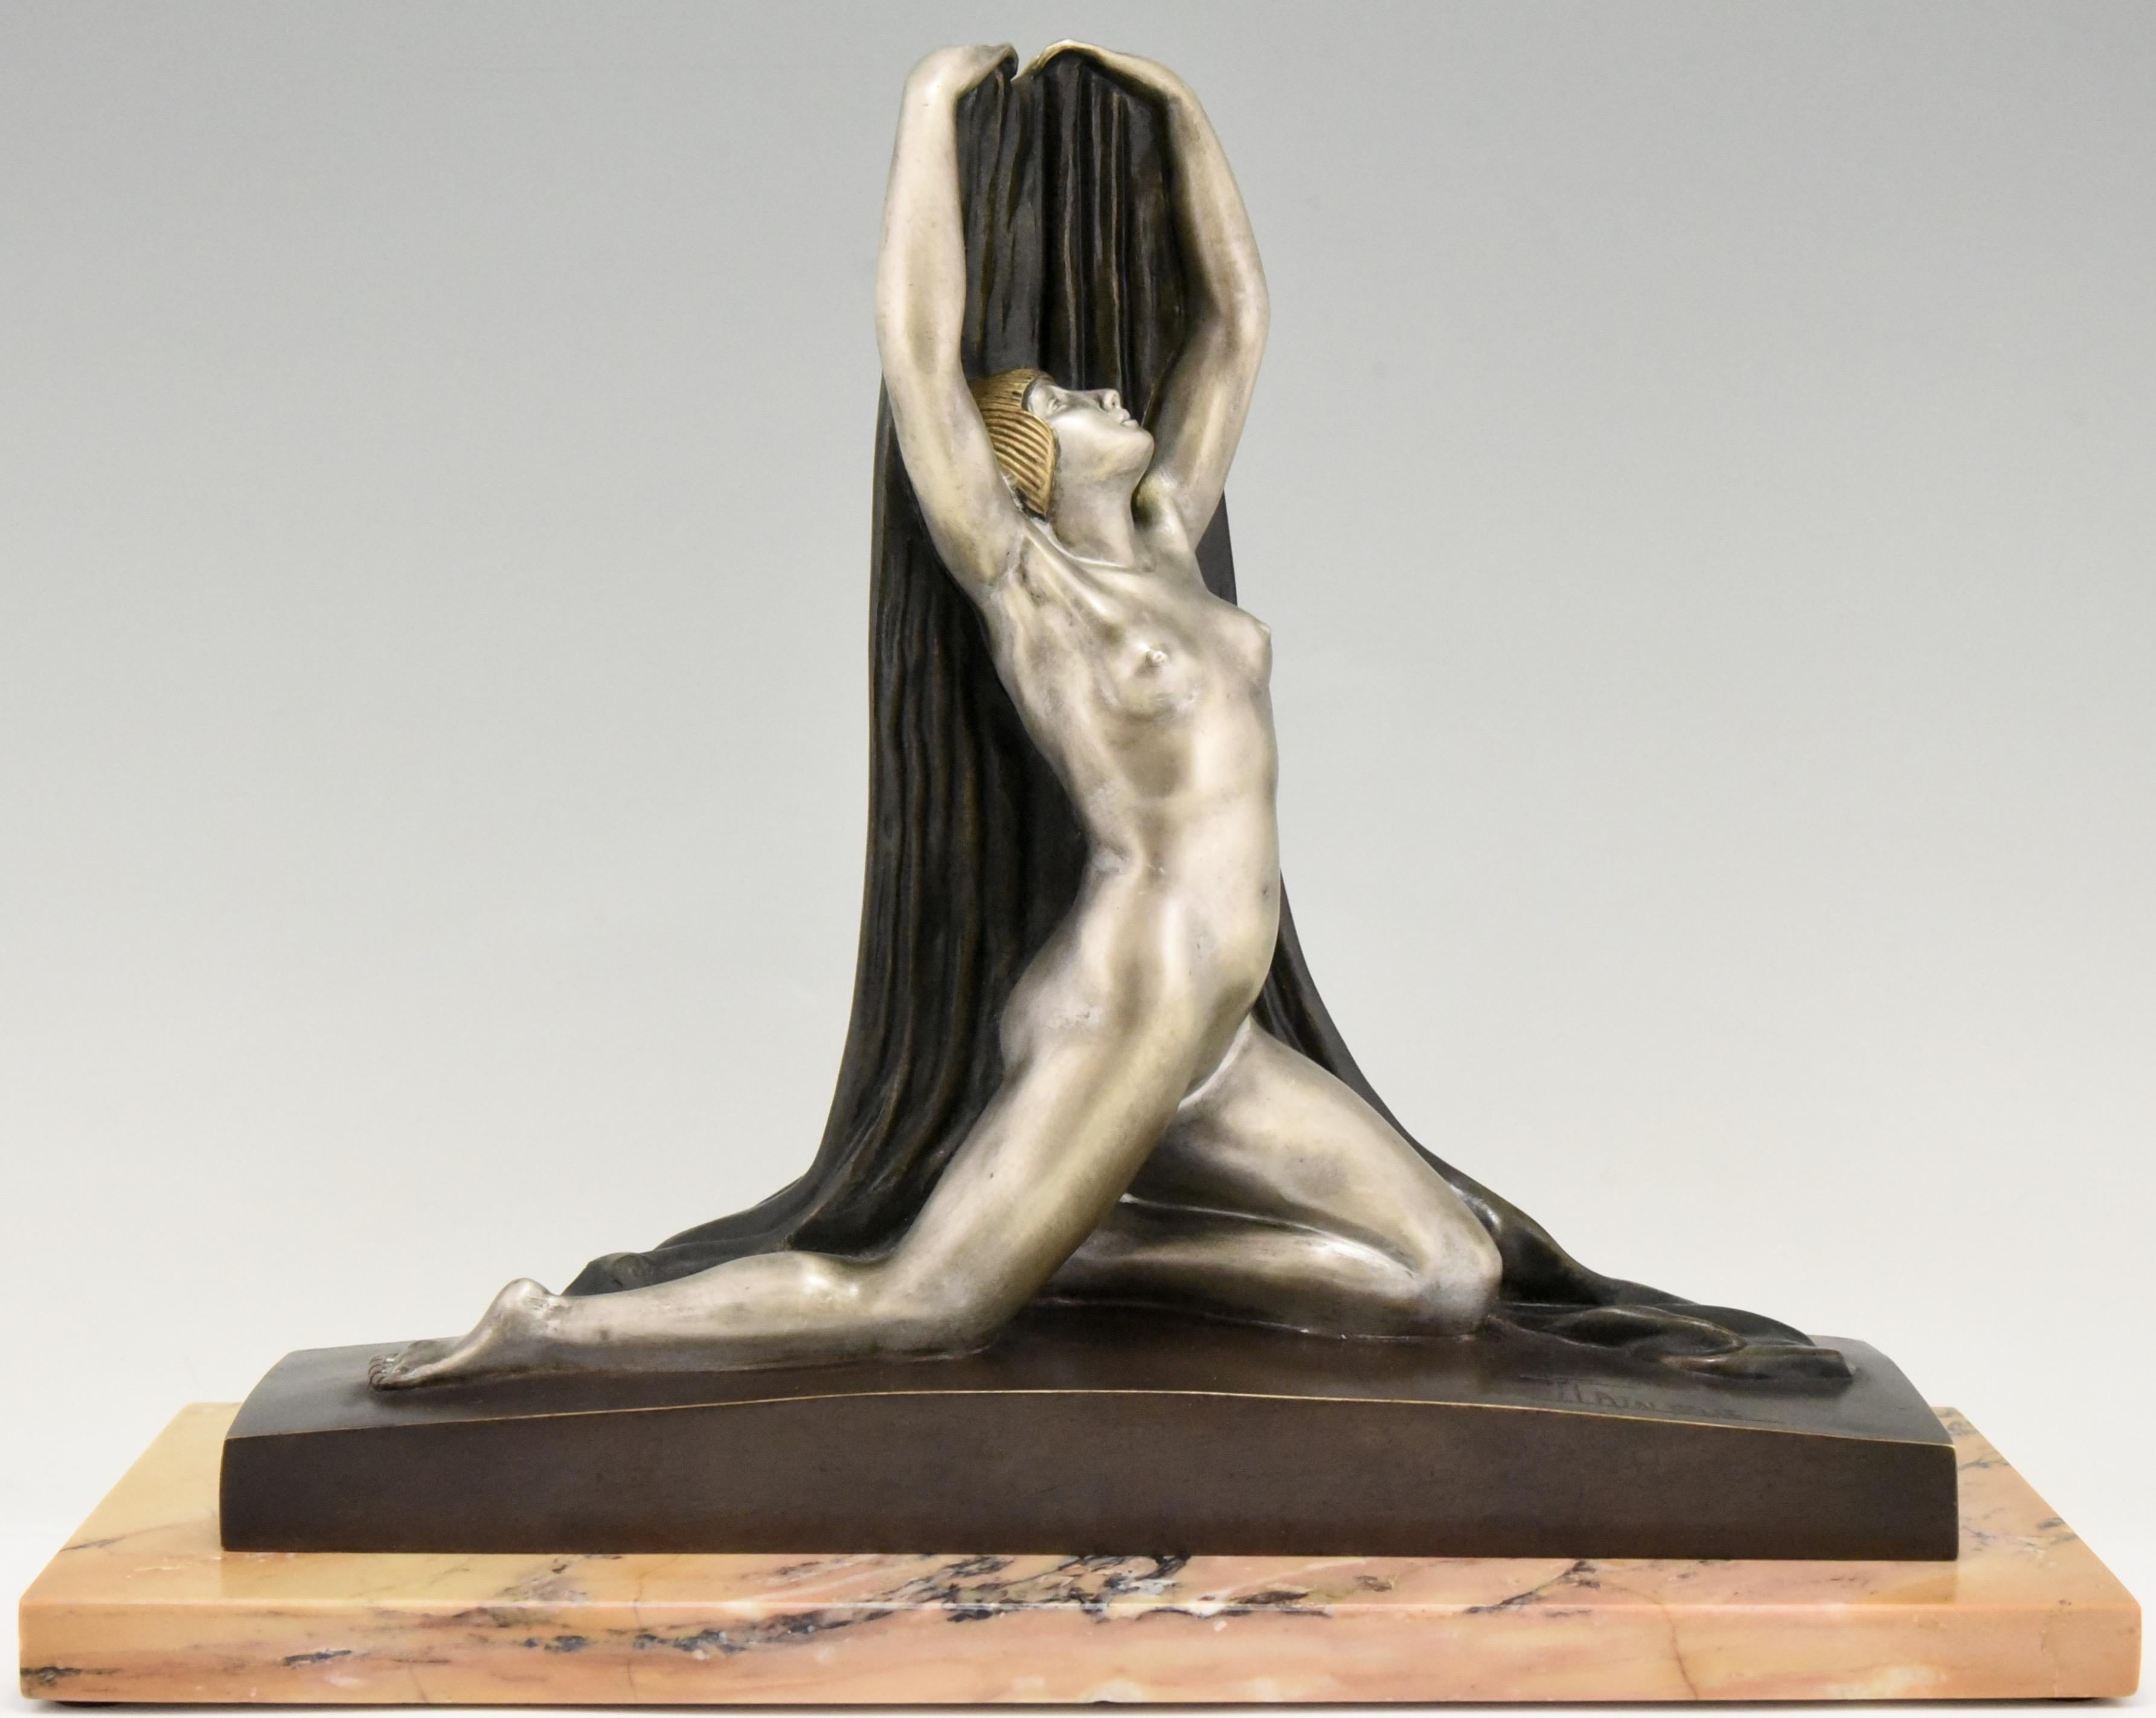 Art Deco bronze sculpture of a nude in split pose with arm outstretched holding a scarf behind her on a marble base. Beautiful multi-color patina. Signed in the bronze F. Trinque, circa 1920.
Elton John had the same bronze in his